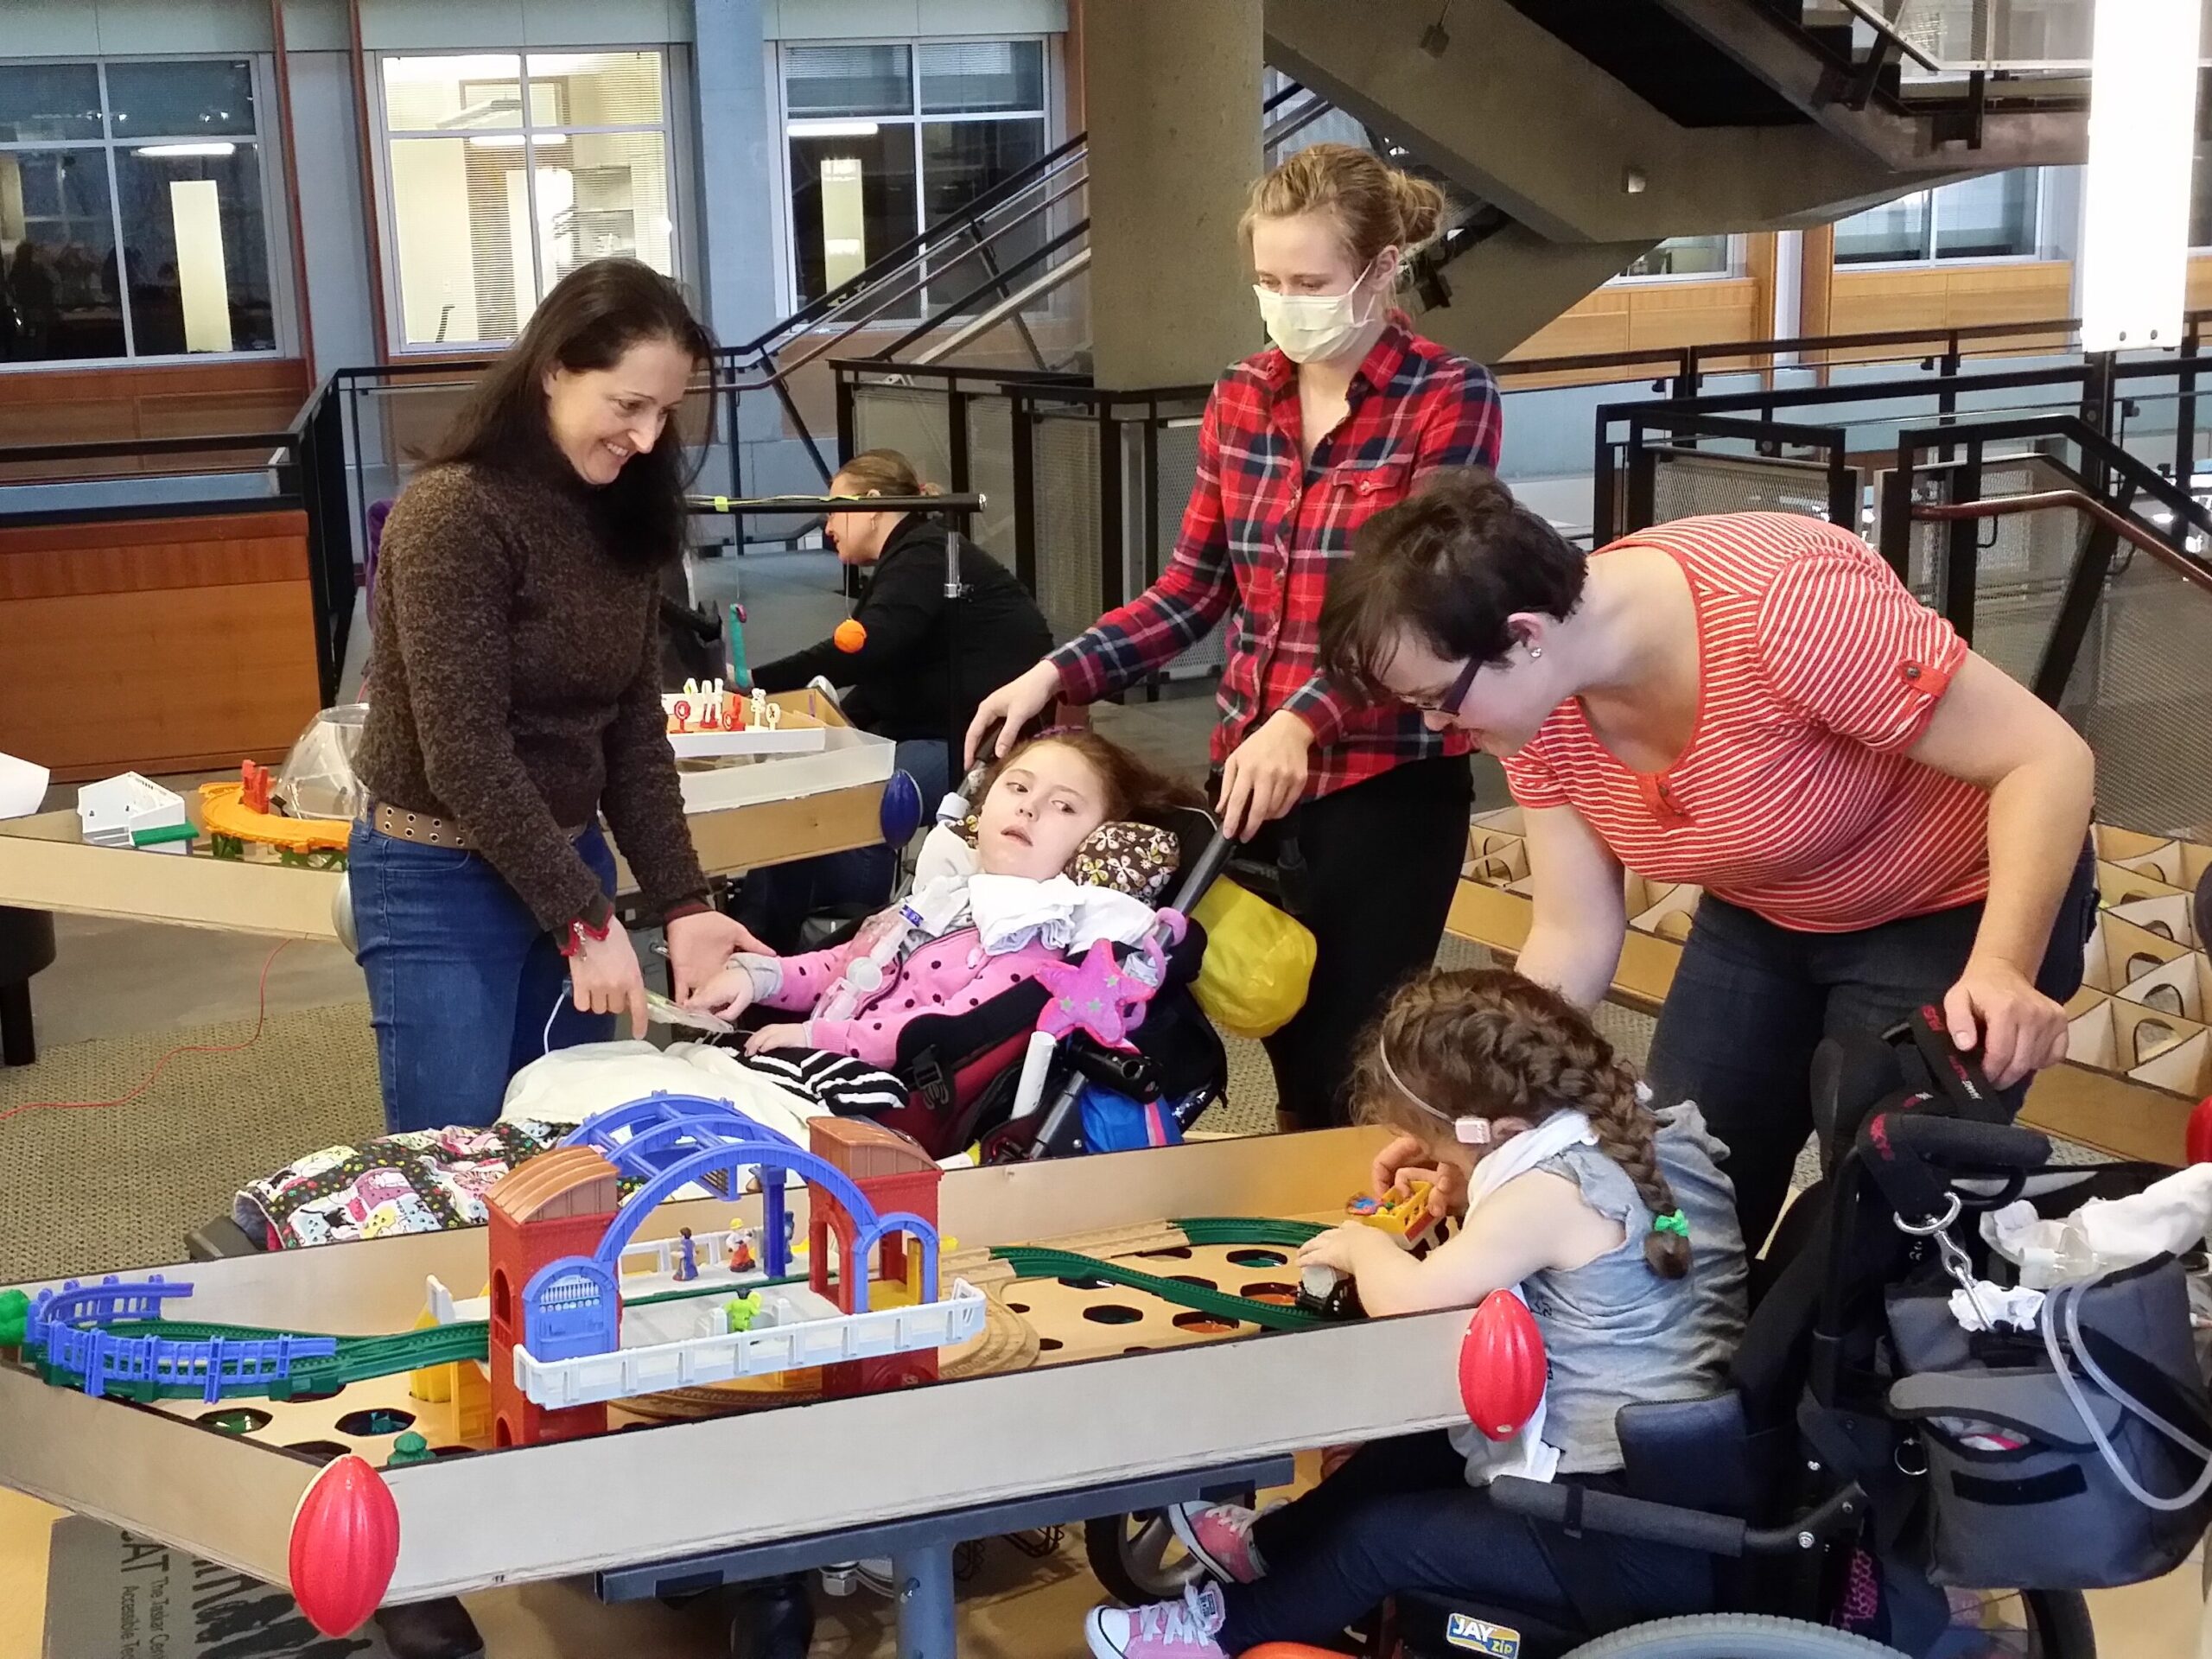 Play Group theme was "trains" in December 2016.